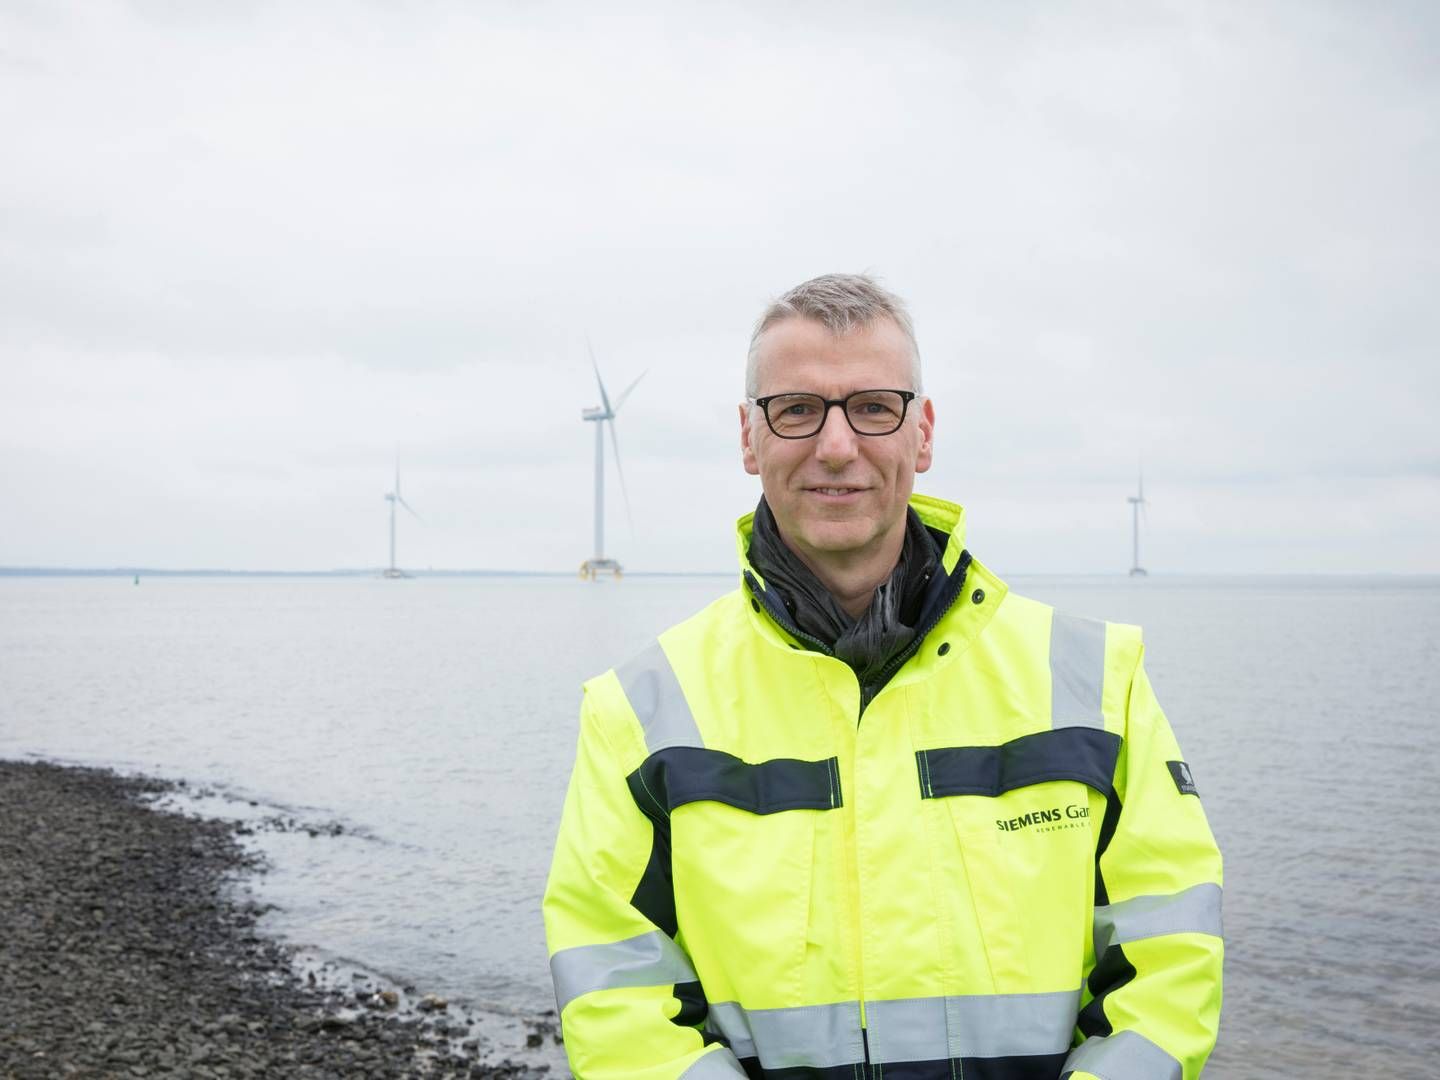 Andreas Nauen is nominated to the board of Green Hydrogen Systems. | Photo: Siemens Gamesa